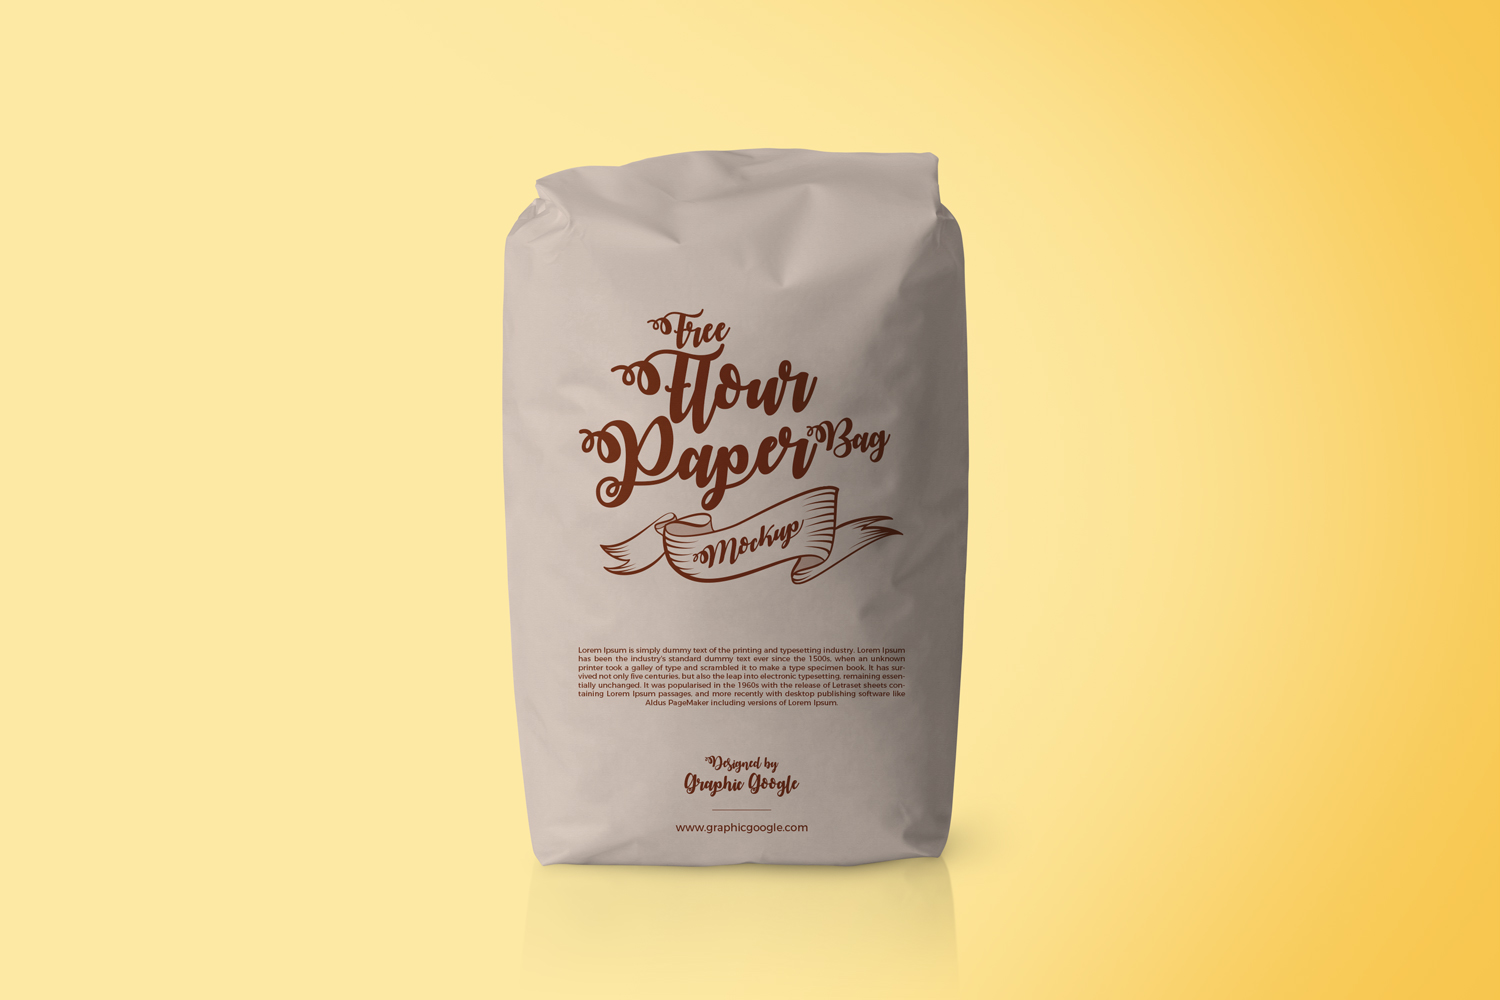 Download Free Flour Paper Bag Packaging MockupGraphic Google ...